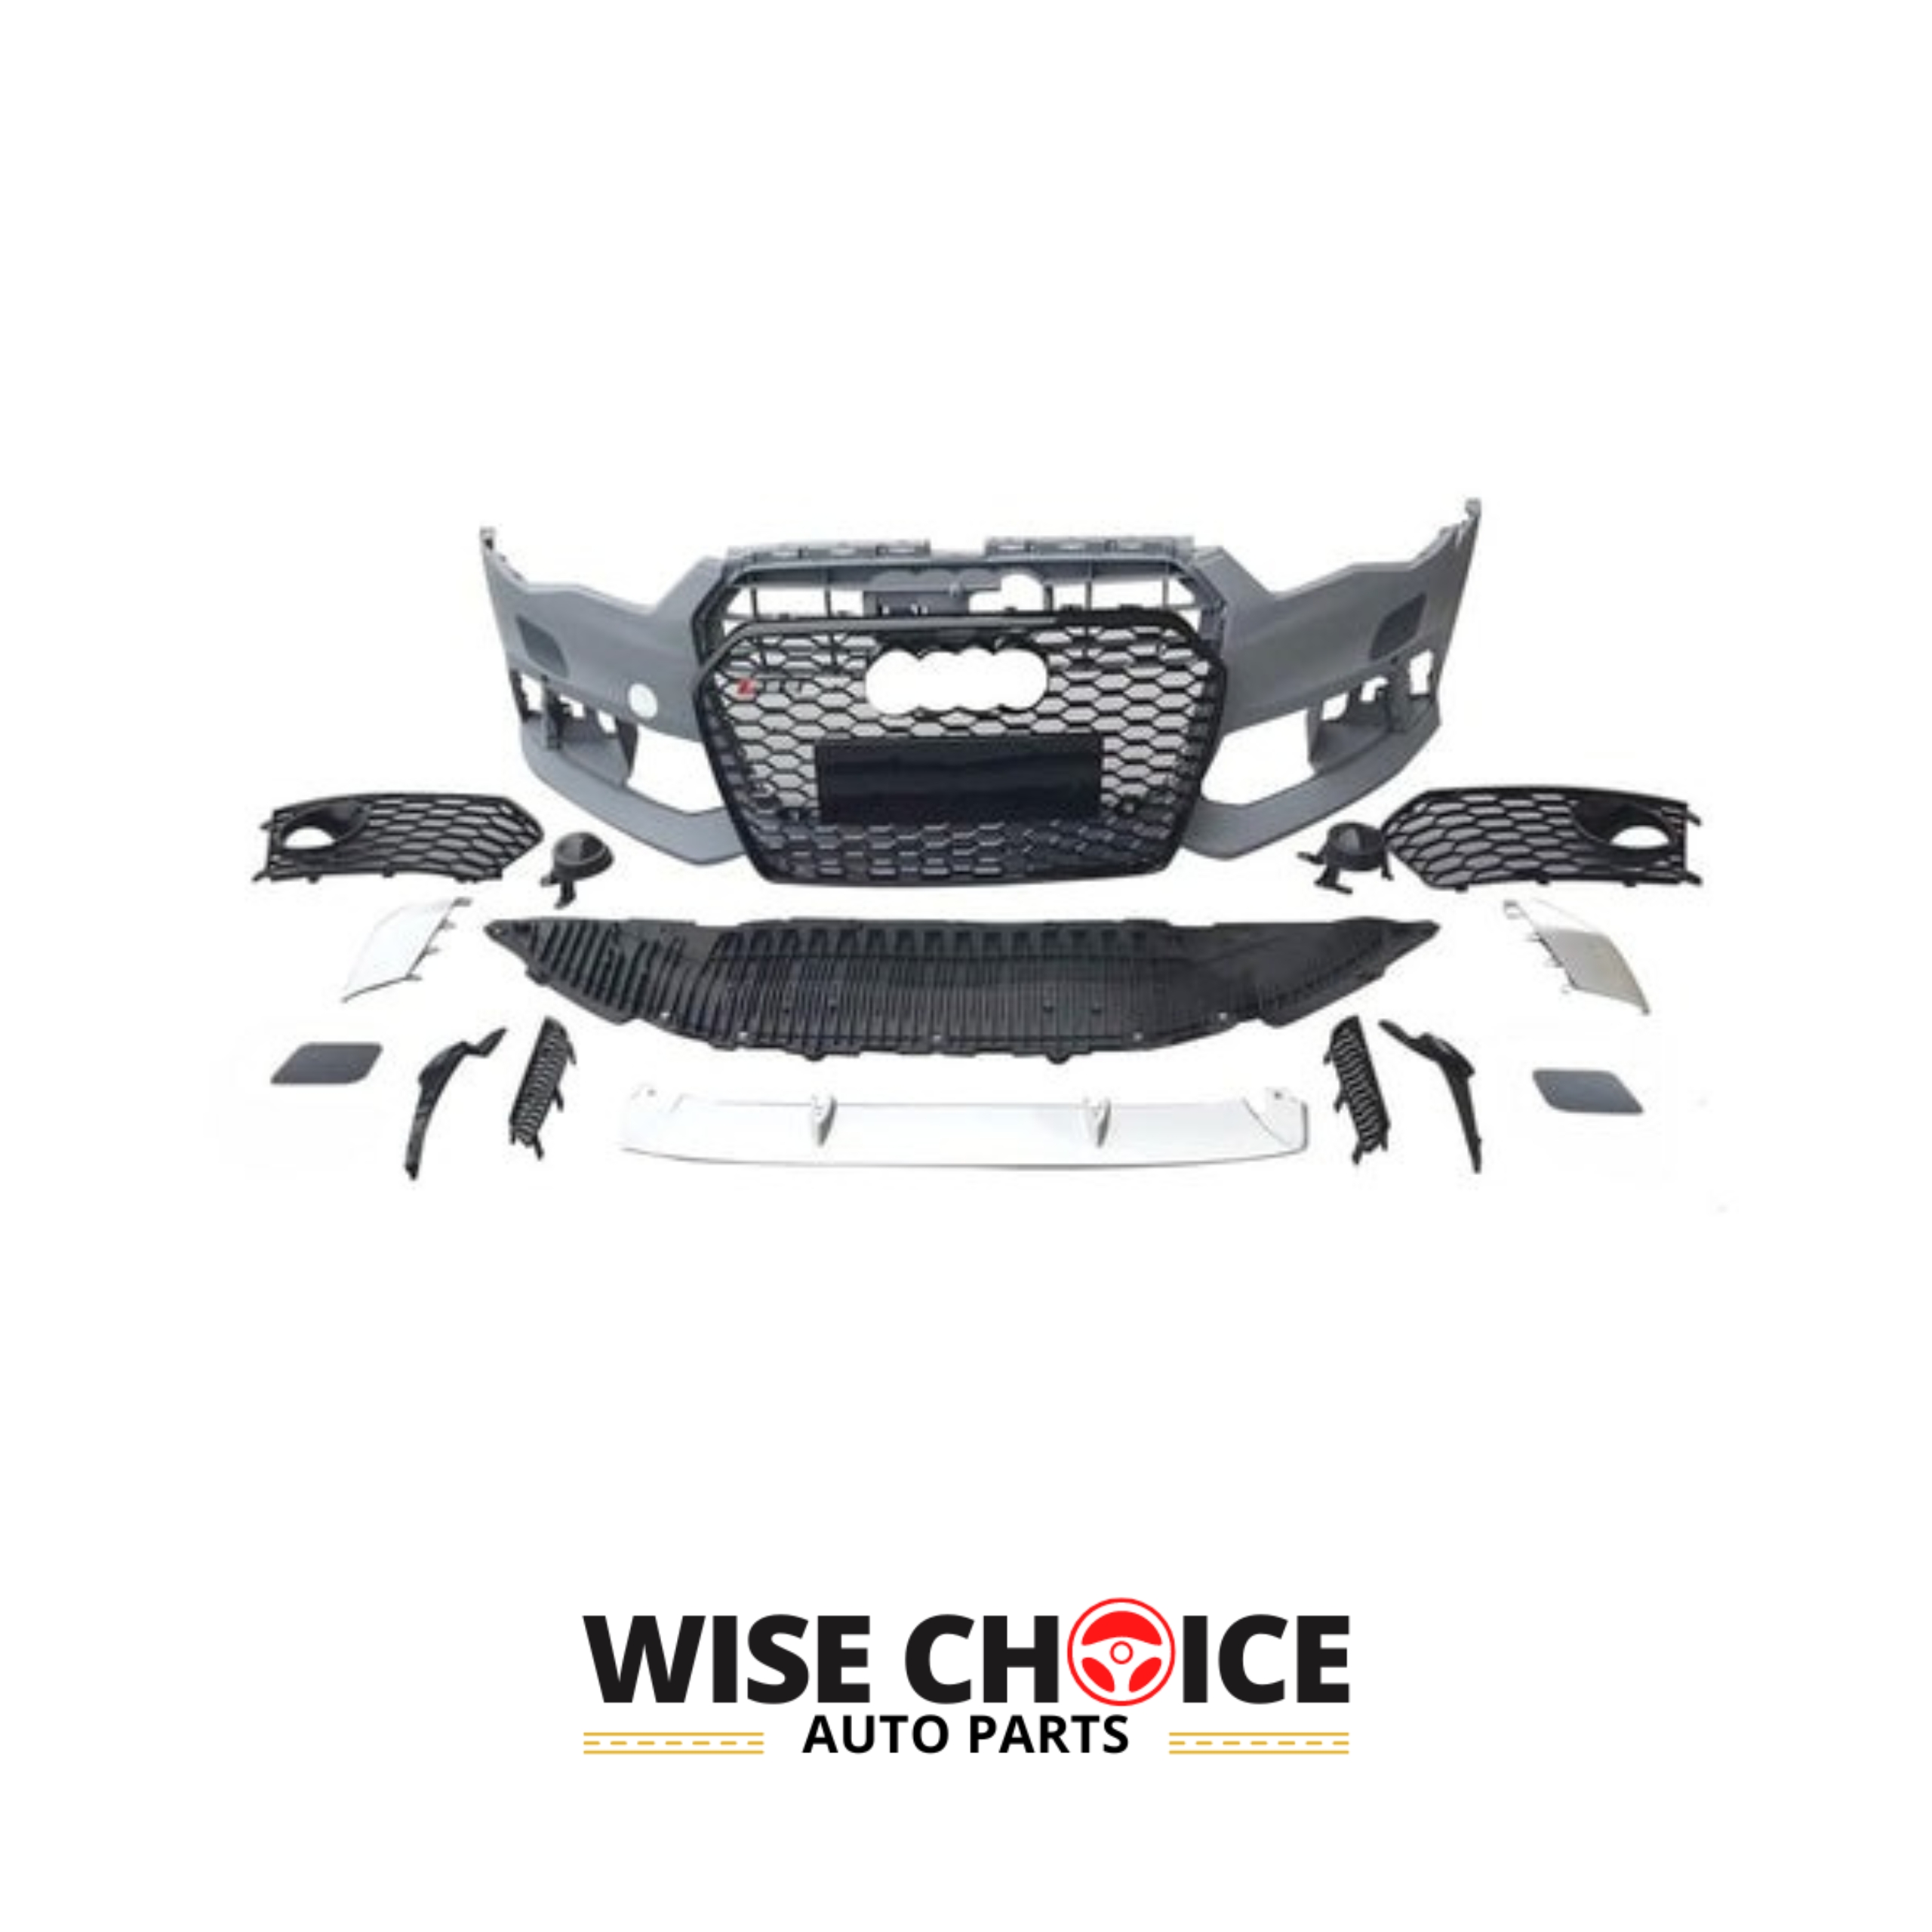 Audi RS6 Style Front Bumper Upgrade for C7 A6/S6 (2012-2015)